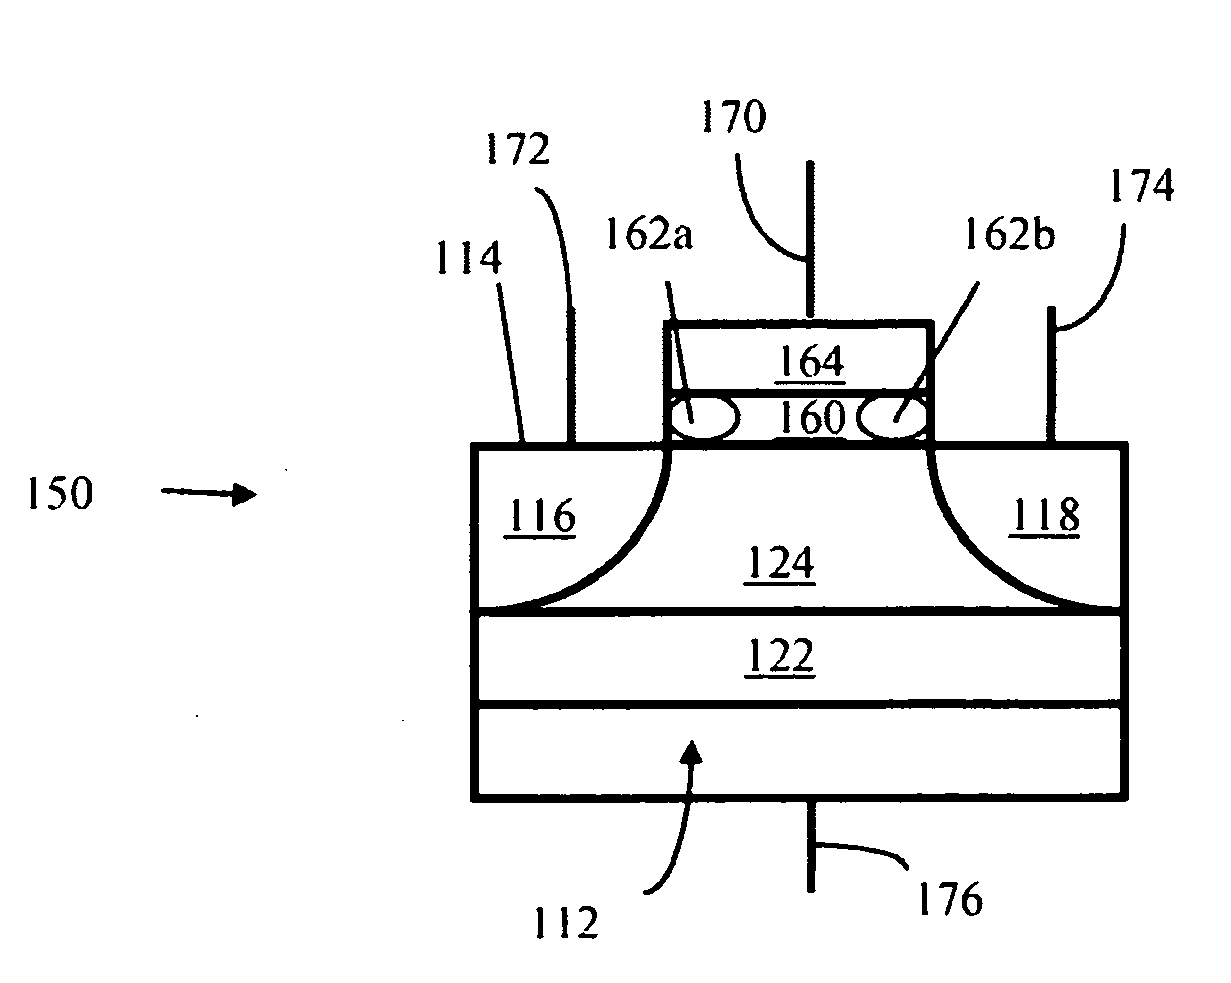 Semiconductor memory having volatile and multi-bit, non-volatile functionality and methods of operating